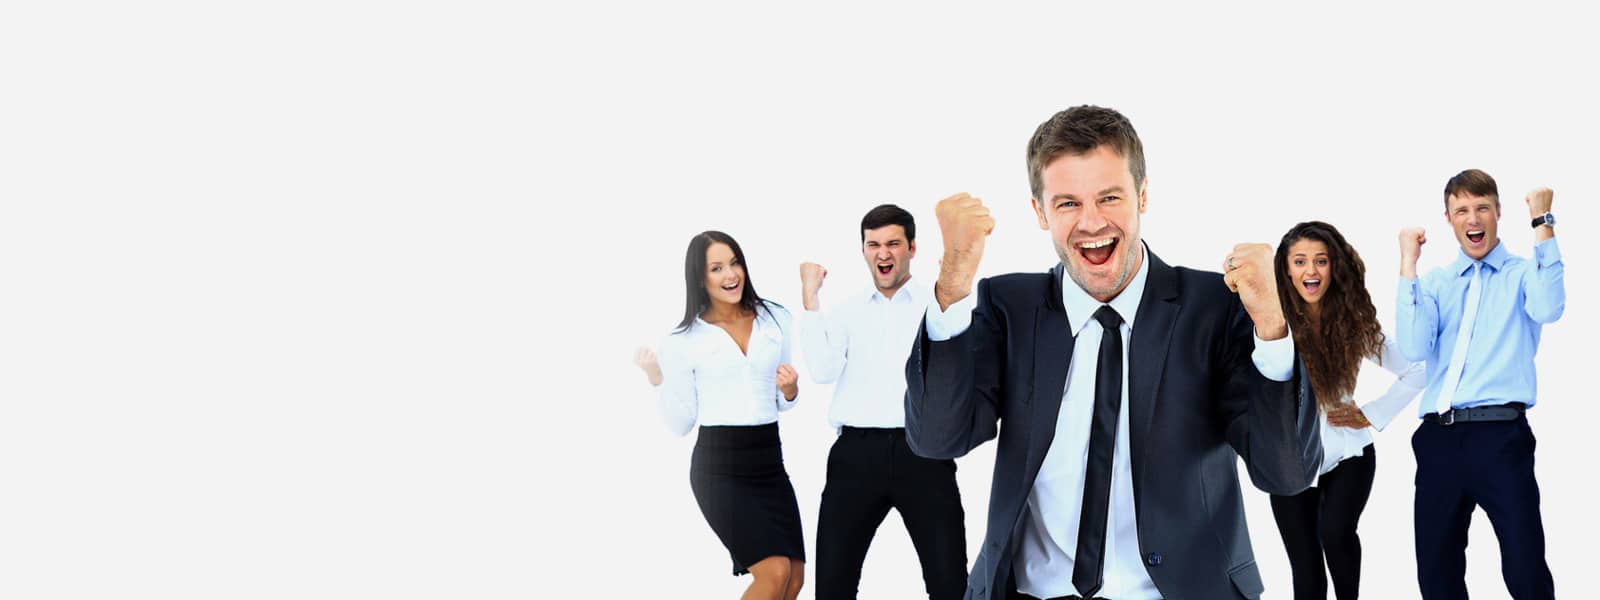 excited business people